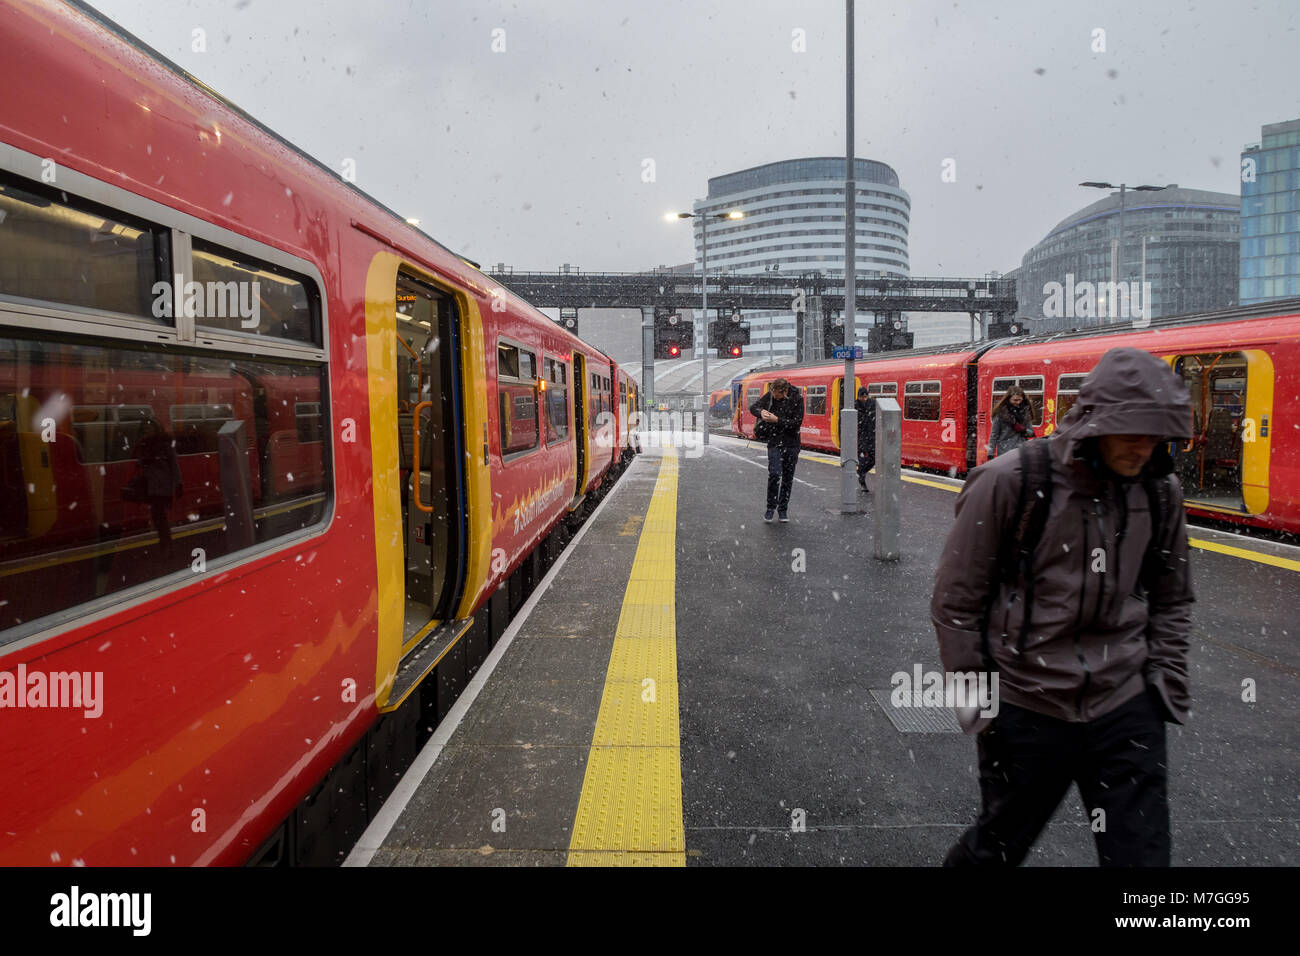 Passengers travelling to work, arriving at Waterloo station, London during a flurry of snow Stock Photo